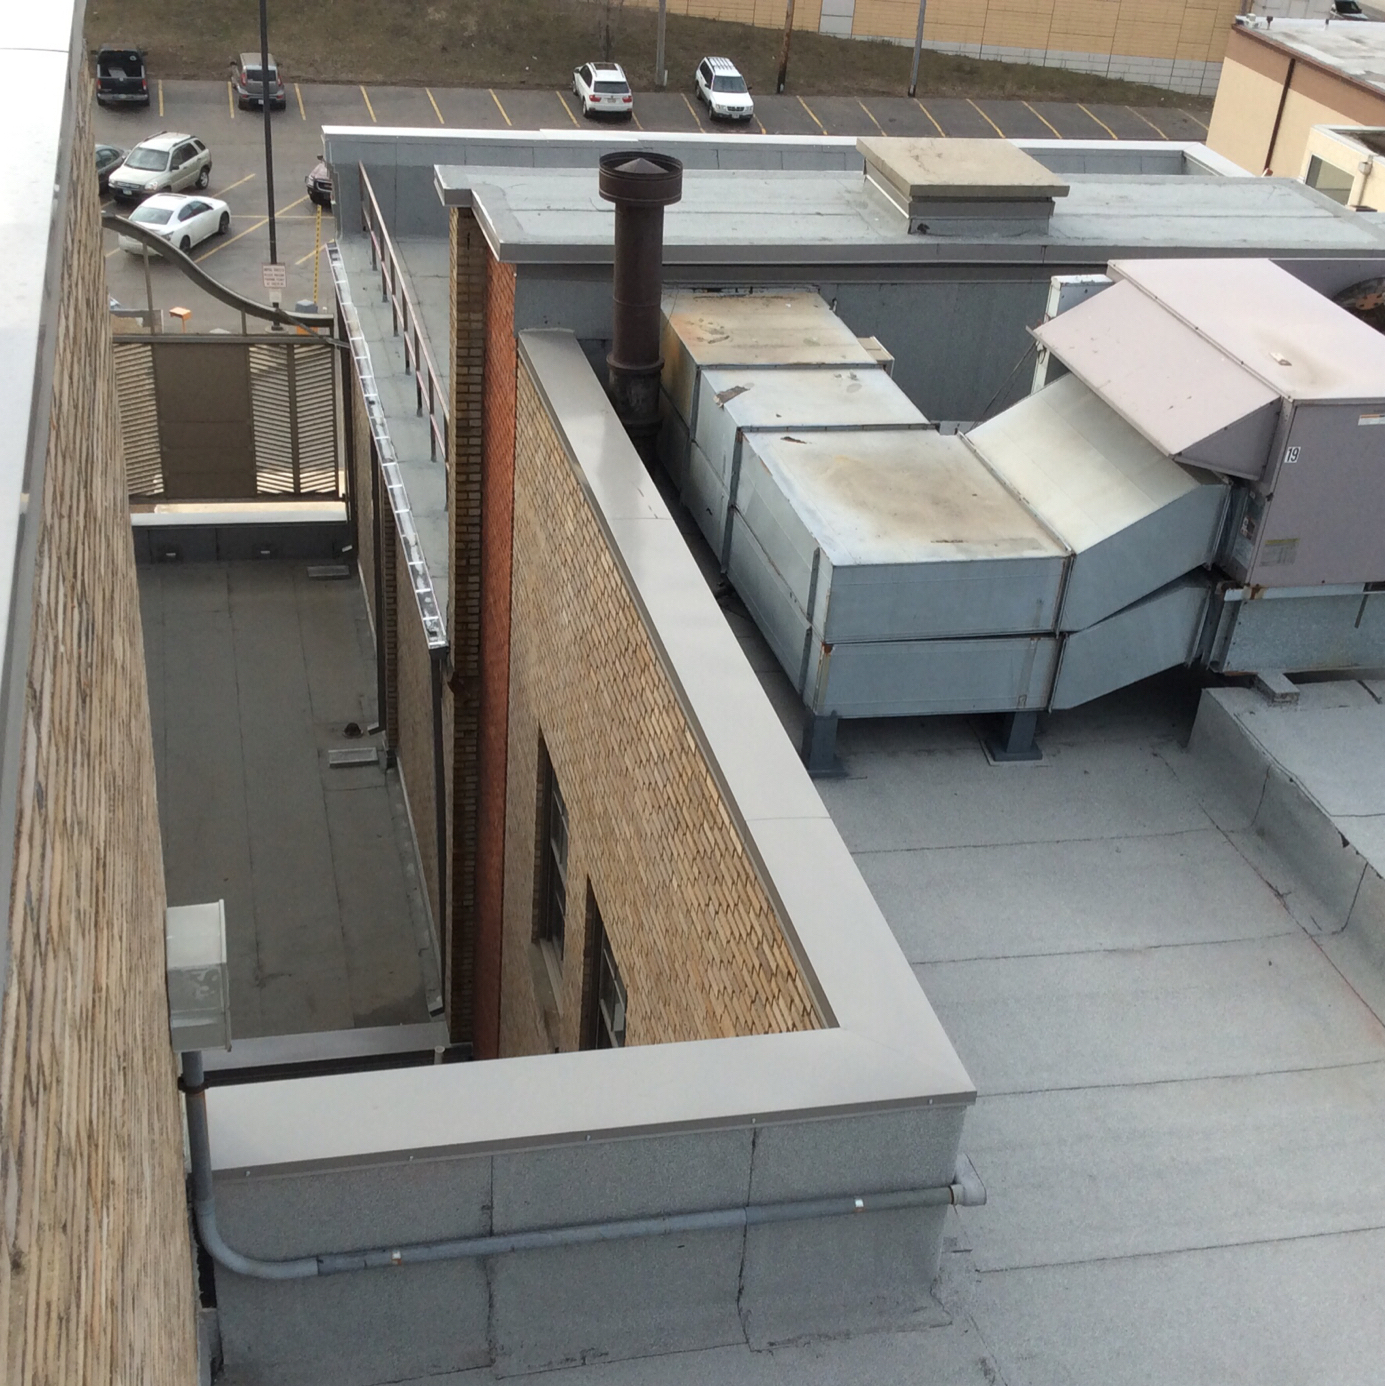 Because of the area’s harsh winter climate, the hotel’s reroofing project required a redundant roofing system that would be strong and durable. The SOPREMA system chosen is typically used in climates like this for that reason.